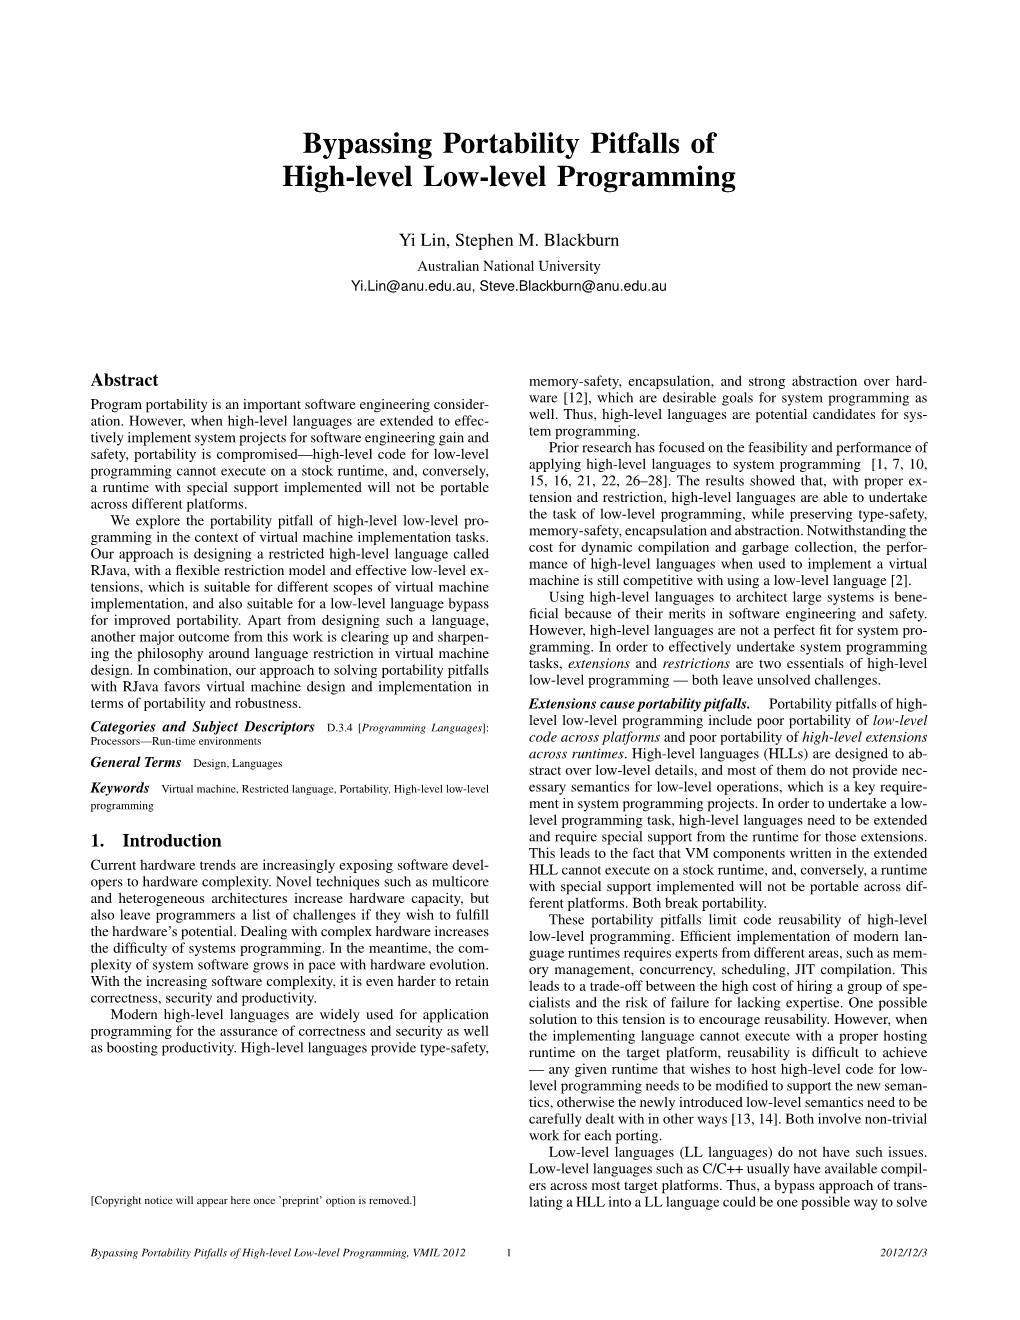 Bypassing Portability Pitfalls of High-Level Low-Level Programming